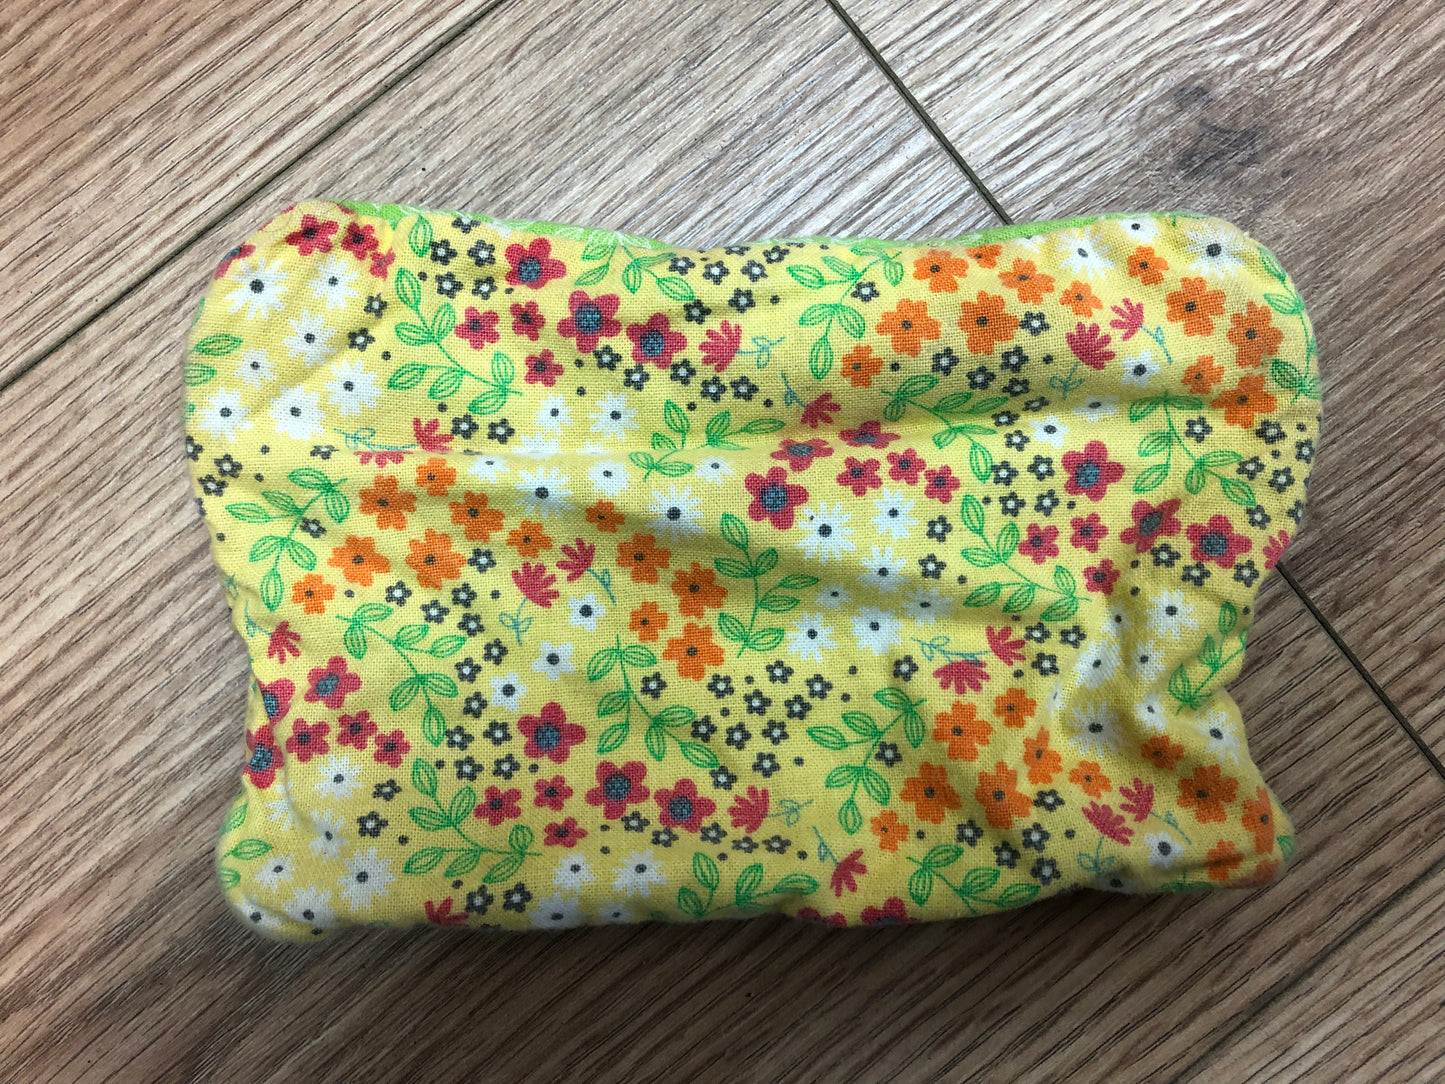 Yellow and green floral coin purse/makeup bag